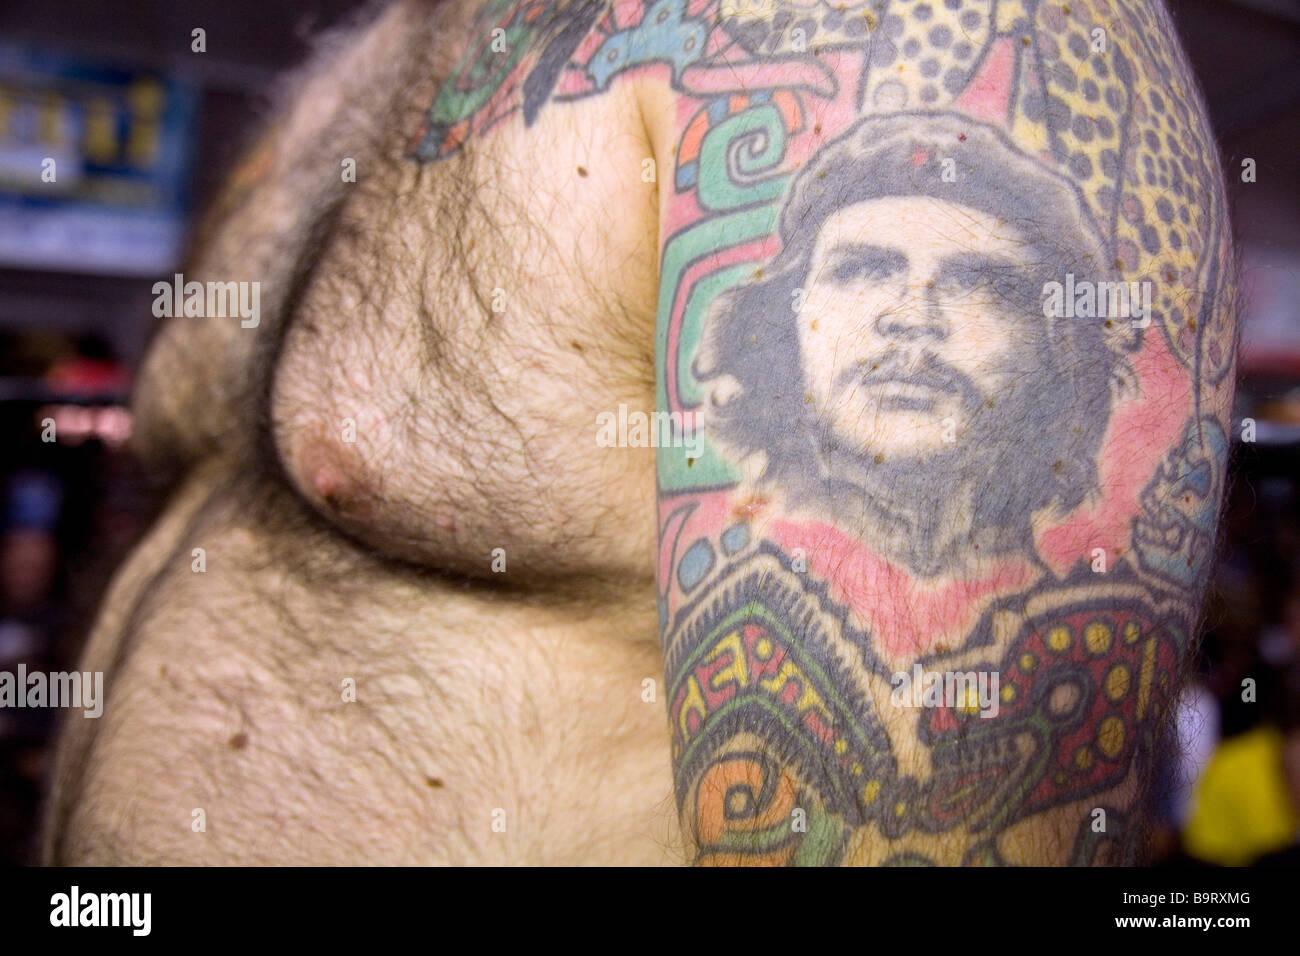 Who Was Che Guevara And What Does Its Use In Tattoo Art Mean